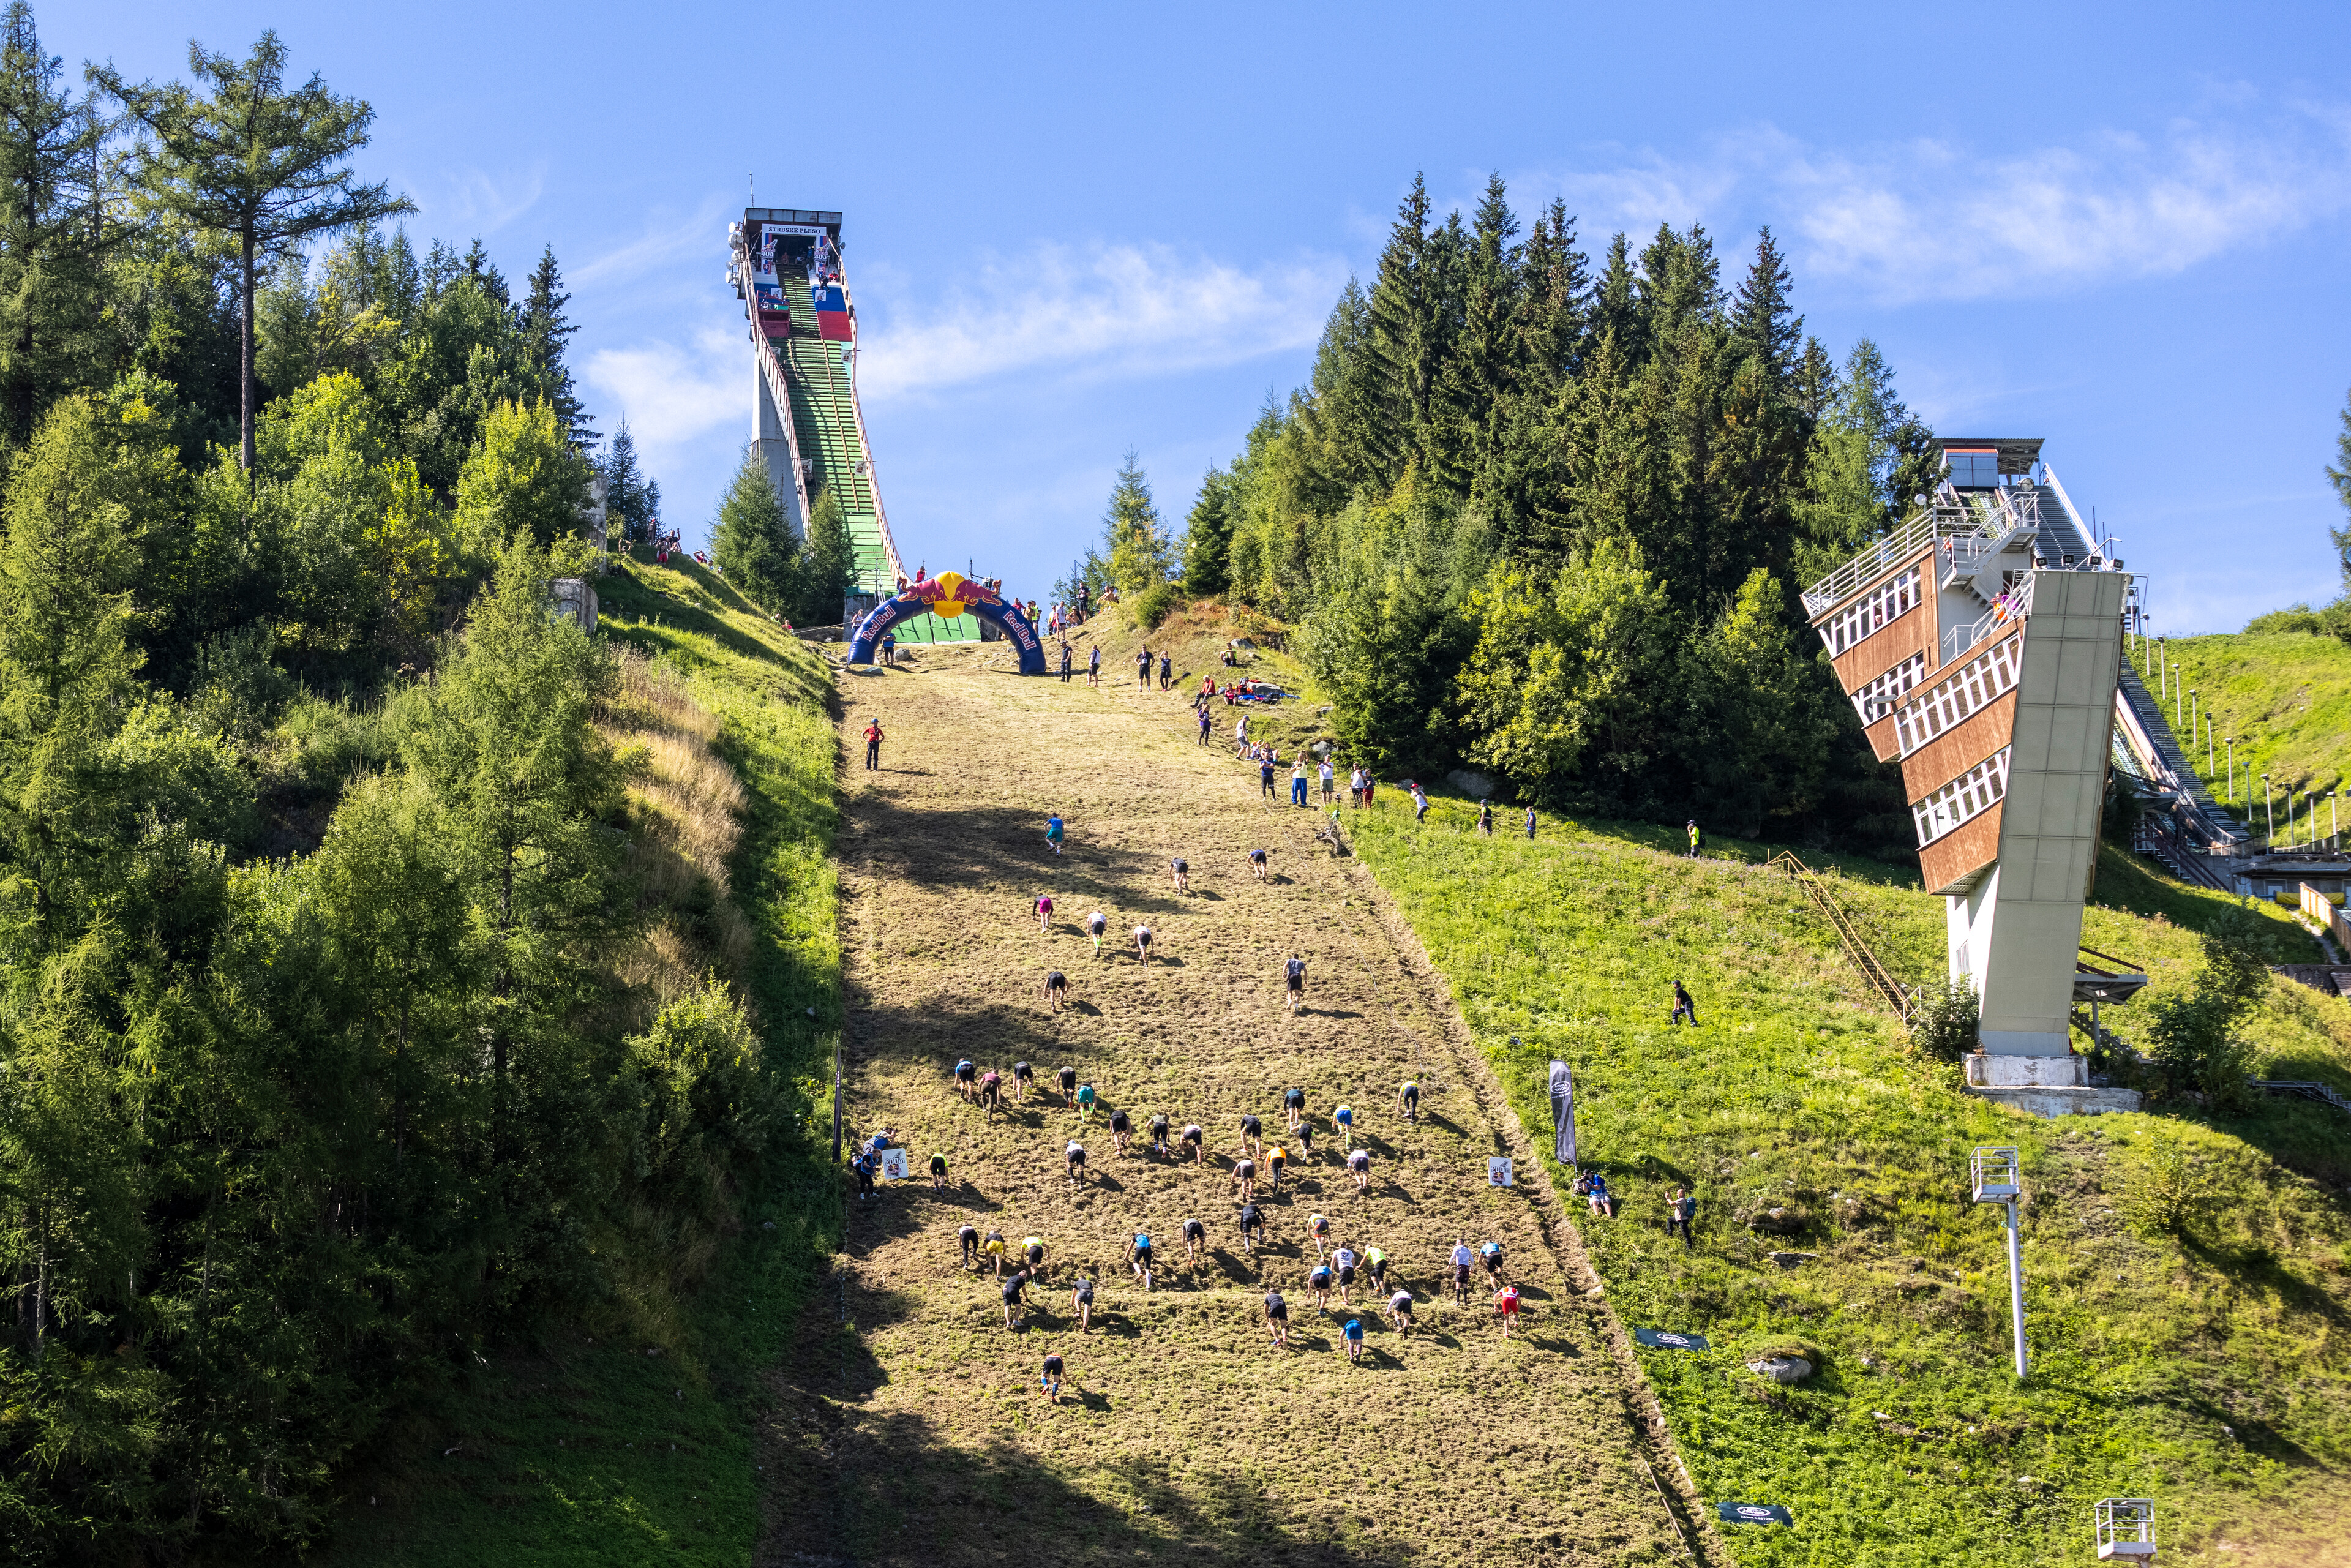 Participants make their way up the 400 meter ski jump HS130 during the Red Bull 400 at Strbske Pleso, Slovakia on September 11, 2021. // Filip Nagy / Red Bull Content Pool // SI202109120643 // Usage for editorial use only //